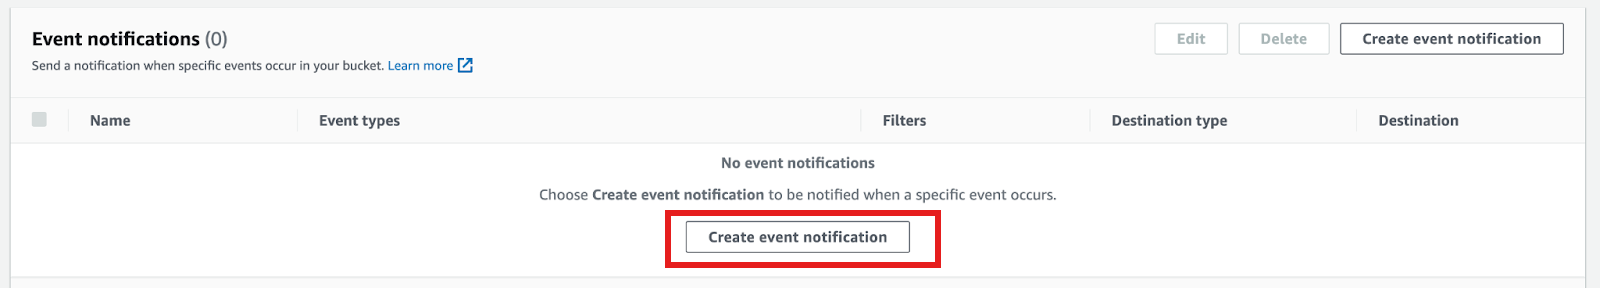 Screenshot of empty event notifications dashboard in AWS